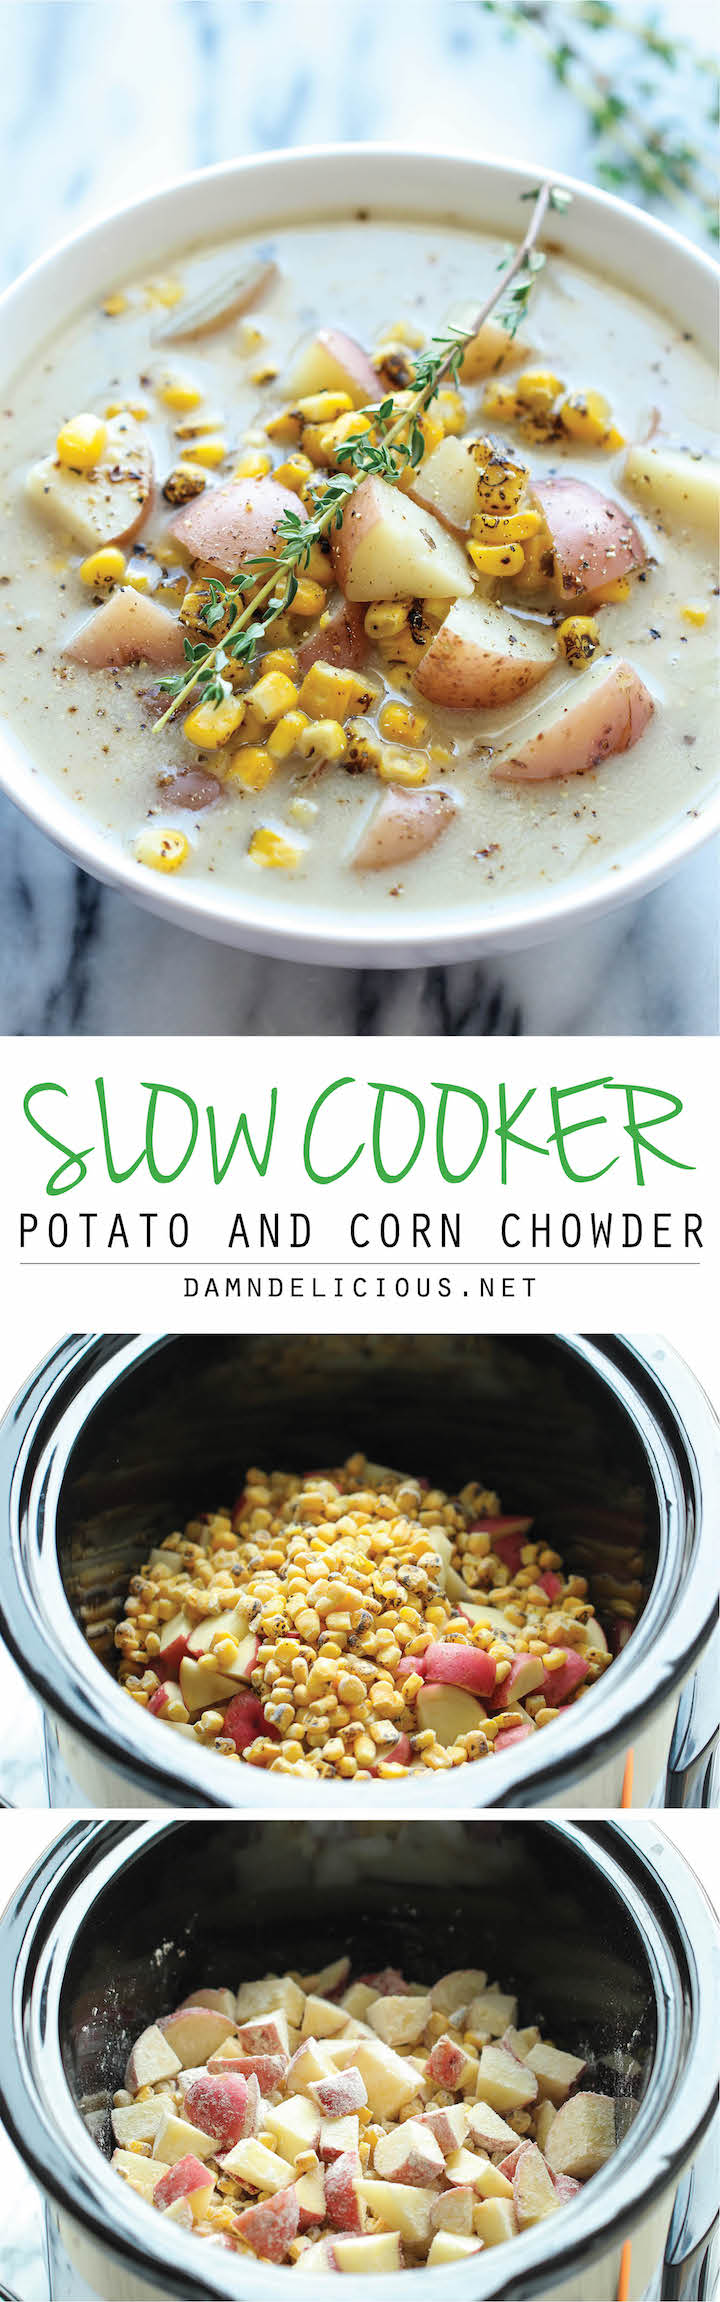 Slow Cooker Potato and Corn Chowder - The easiest chowder you will ever make. Throw everything in the crockpot and you're set! Easy peasy!